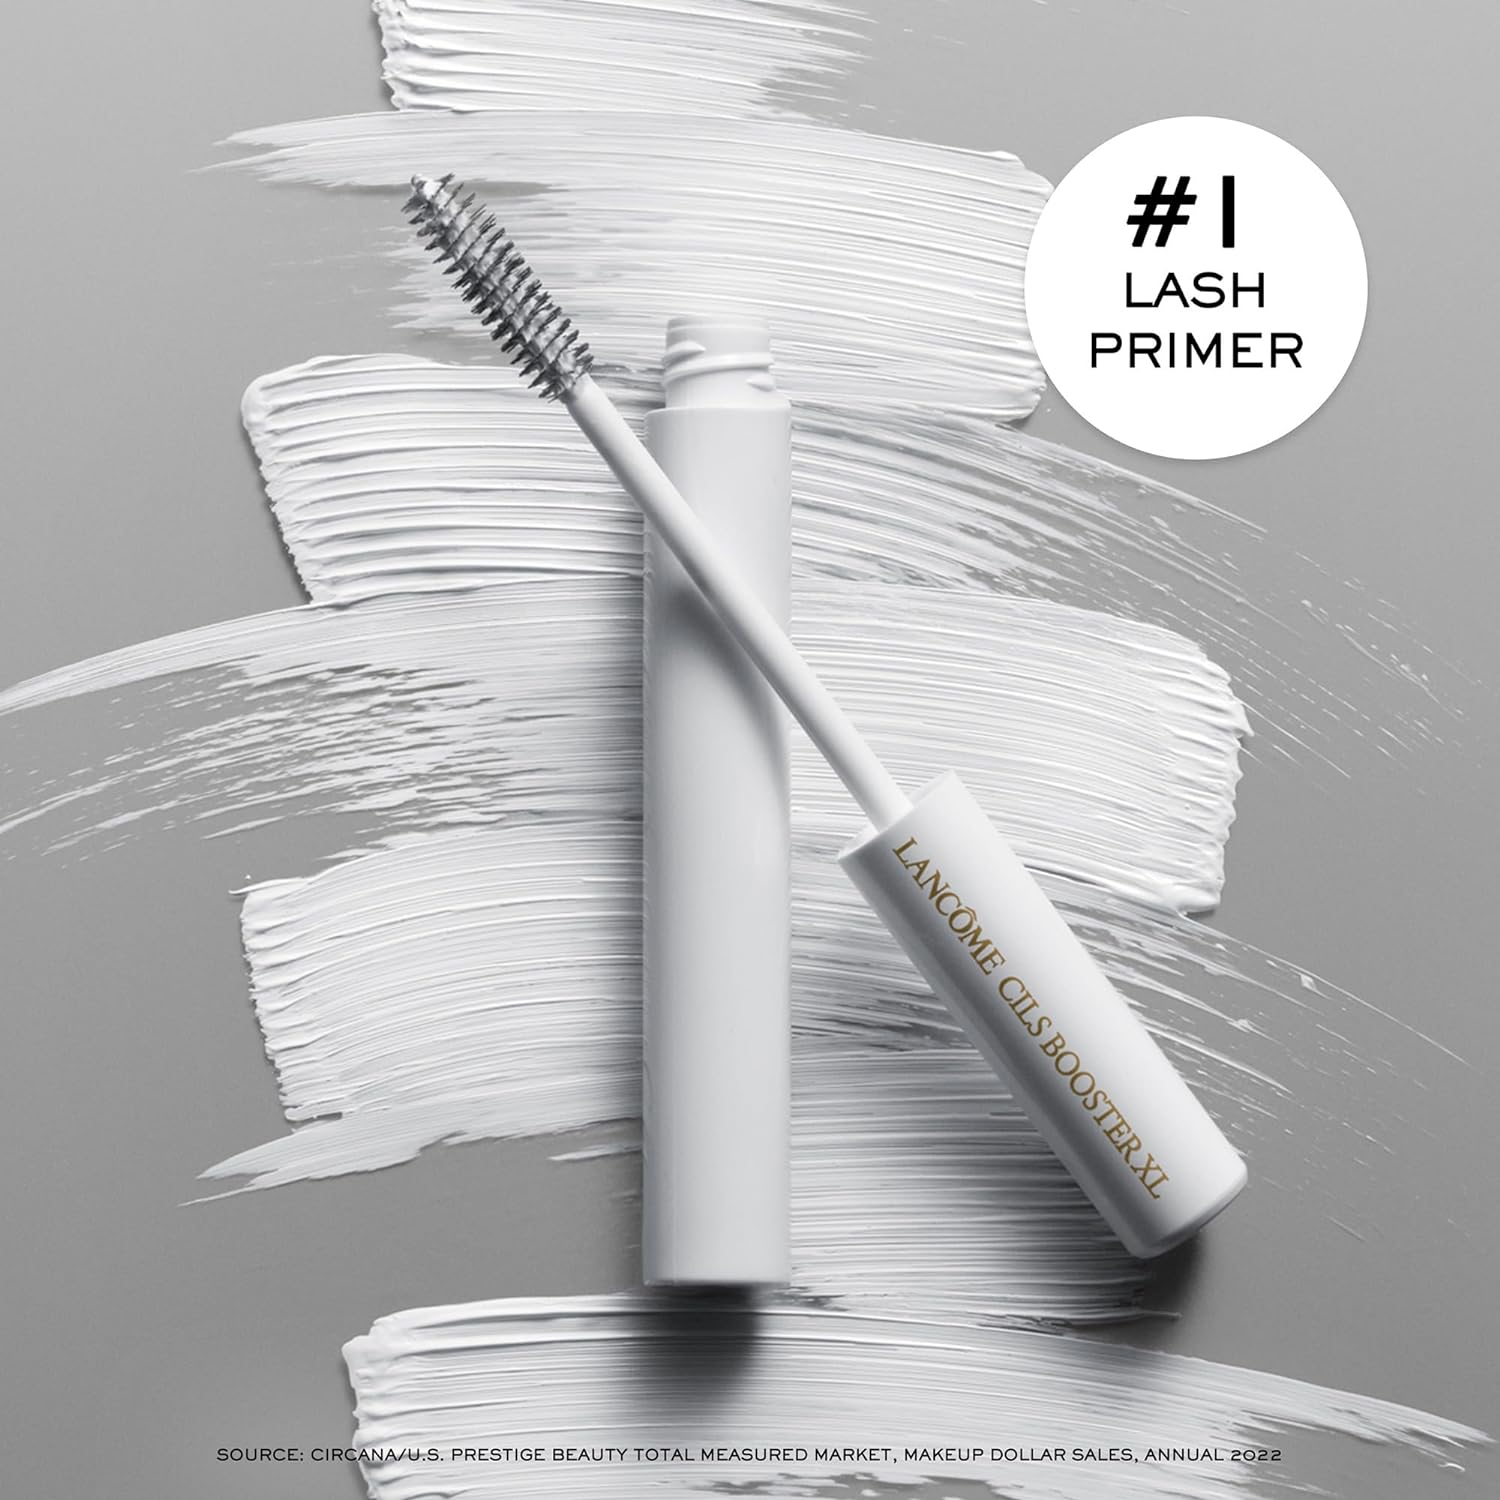 Lancôme Cils Booster XL Enhancing Lash & Mascara Primer - Infused with Micro-fibers, Vitamin B5 and Vitamin E - Boosts Mascara Volume, Length & Curl : Beauty & Personal Care